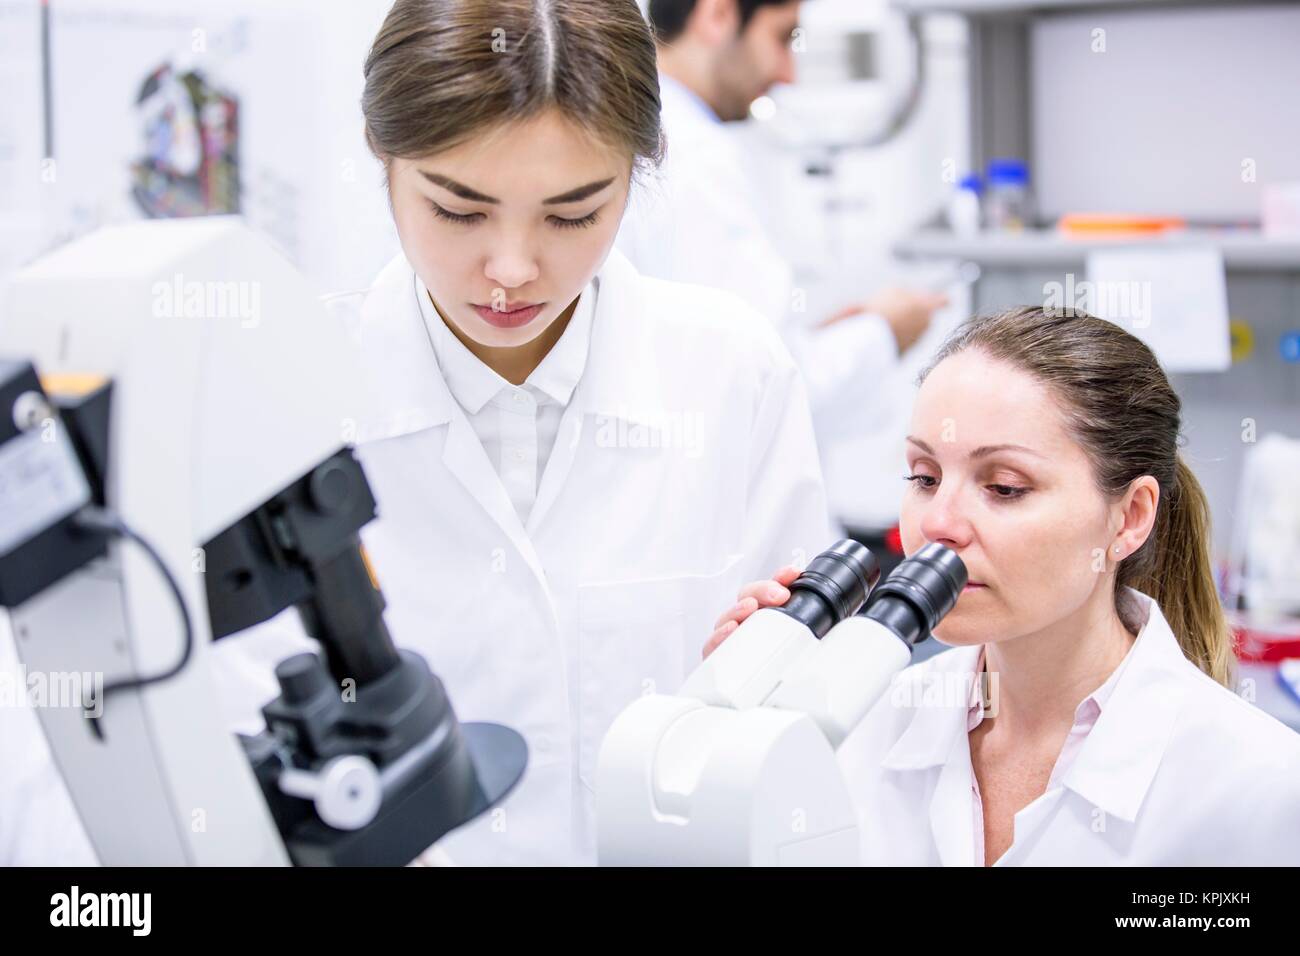 Female scientists working in laboratory. Stock Photo